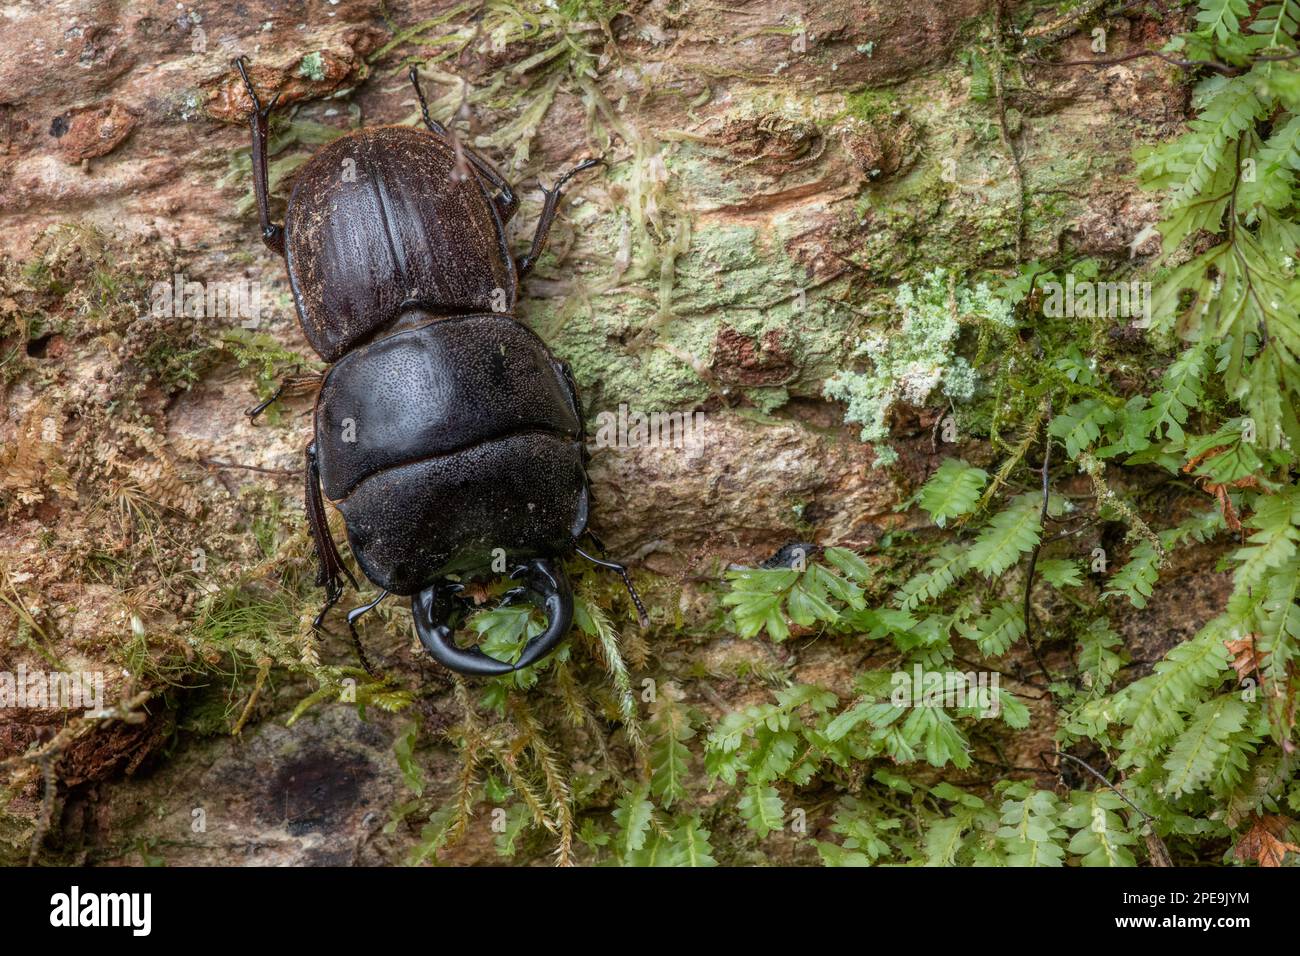 Geodorcus helmsi, New Zealand giant stag beetle or Helms's stag beetle an endemic insect from Fiordland National Park in Aotearoa. Stock Photo